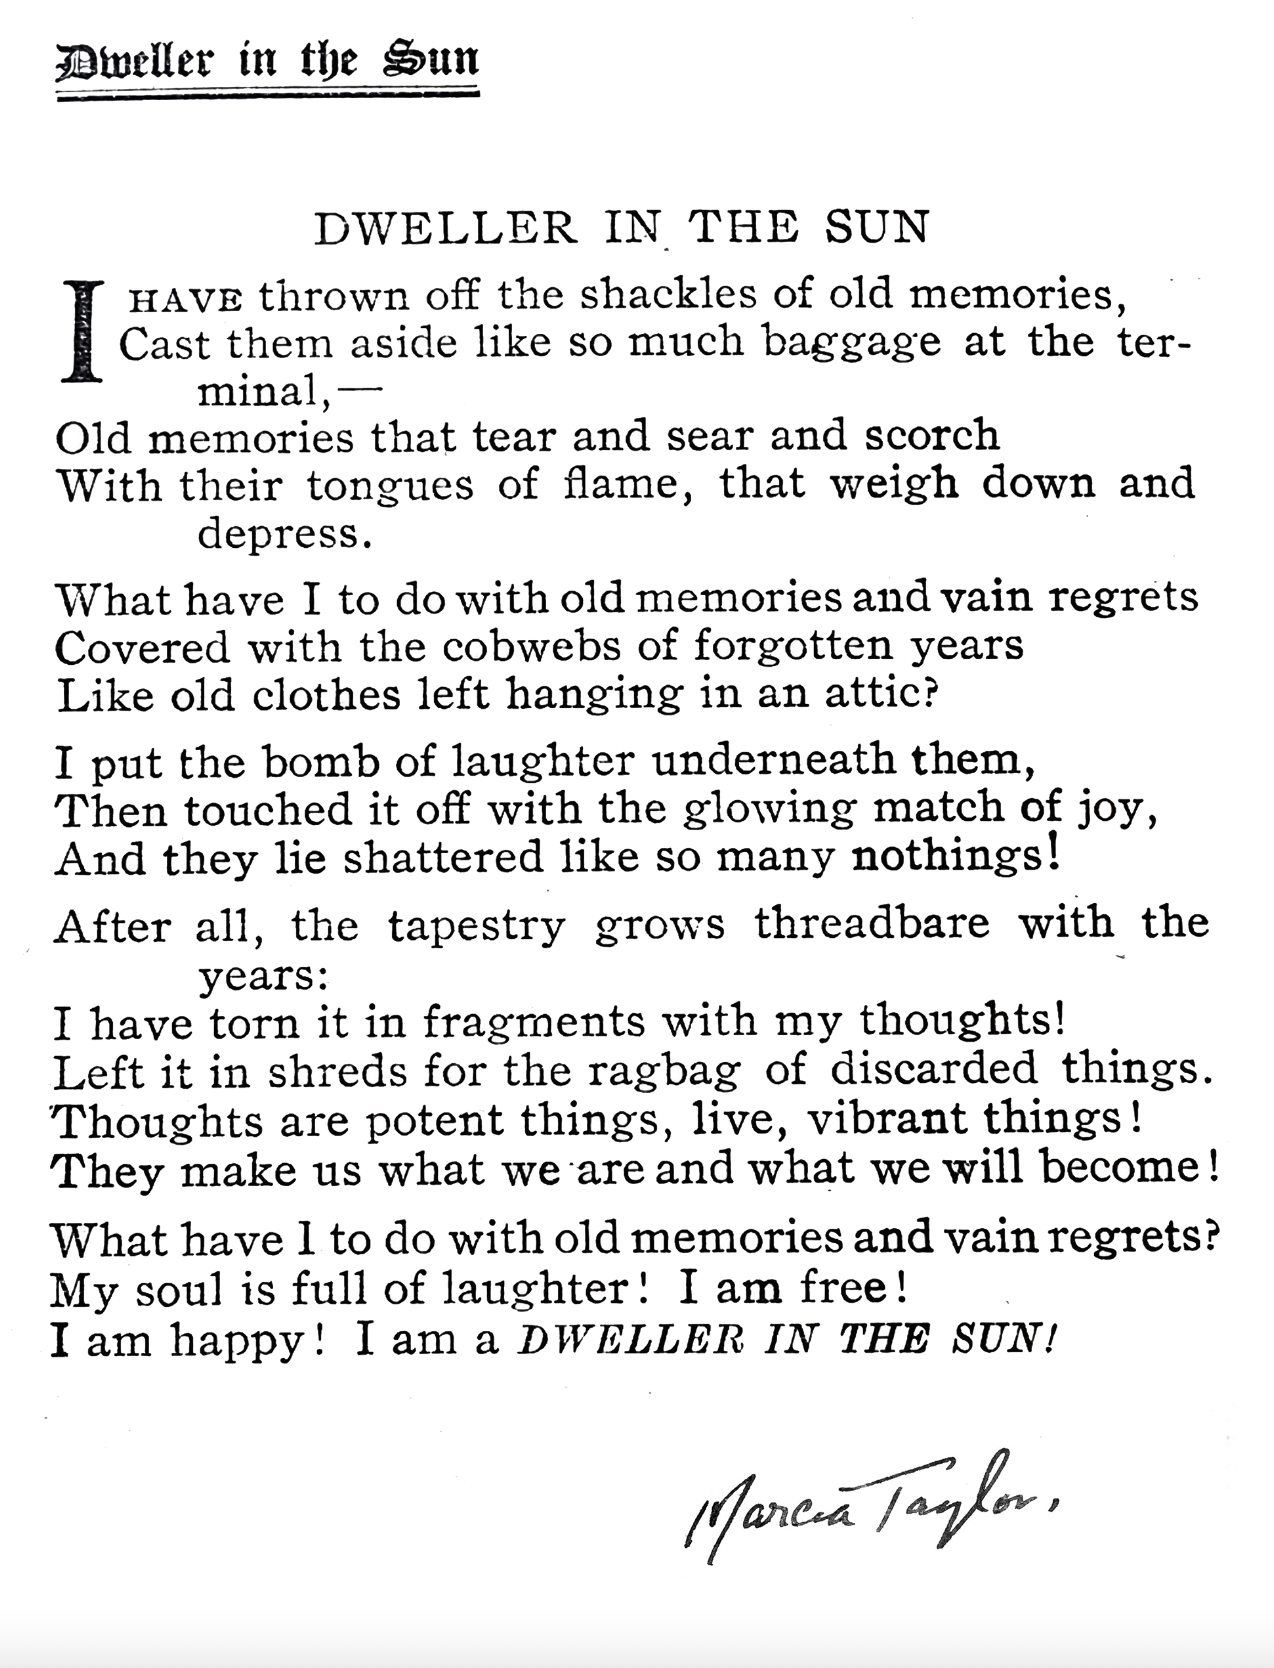 A black and white copy of Marcia's poem "Dweller in the Sun". It reads:
I have thrown off the shackles of old memories,/Cast them aside like so much baggage at the terminal,/ Old memories that tear and sear and scorch/ with their tongues of flame, that weigh down and depress./ What have I to do with old memories and vain regrets/ Covered with the cobwebs of forgotten years/ Like old clothes left hanging in the attic?/ I put the bomb of laughter underneath them,/ Then touched it off with the glowing match of joy,/ And they lie shattered like so many nothings!/ After all, the tapestry grows threadbare with the years:/ I have torn it in fragments with my thoughts!/ Left it in shreds for the ragbag of discarded things./ Thoughts are potent things, live, vibrant things!/ They make us what we are and what we will become!/ What have I to do with old memories and vain regrets?/My soul is full of laughter! I am free!/ I am happy! I am a DWELLER IN THE SUN!